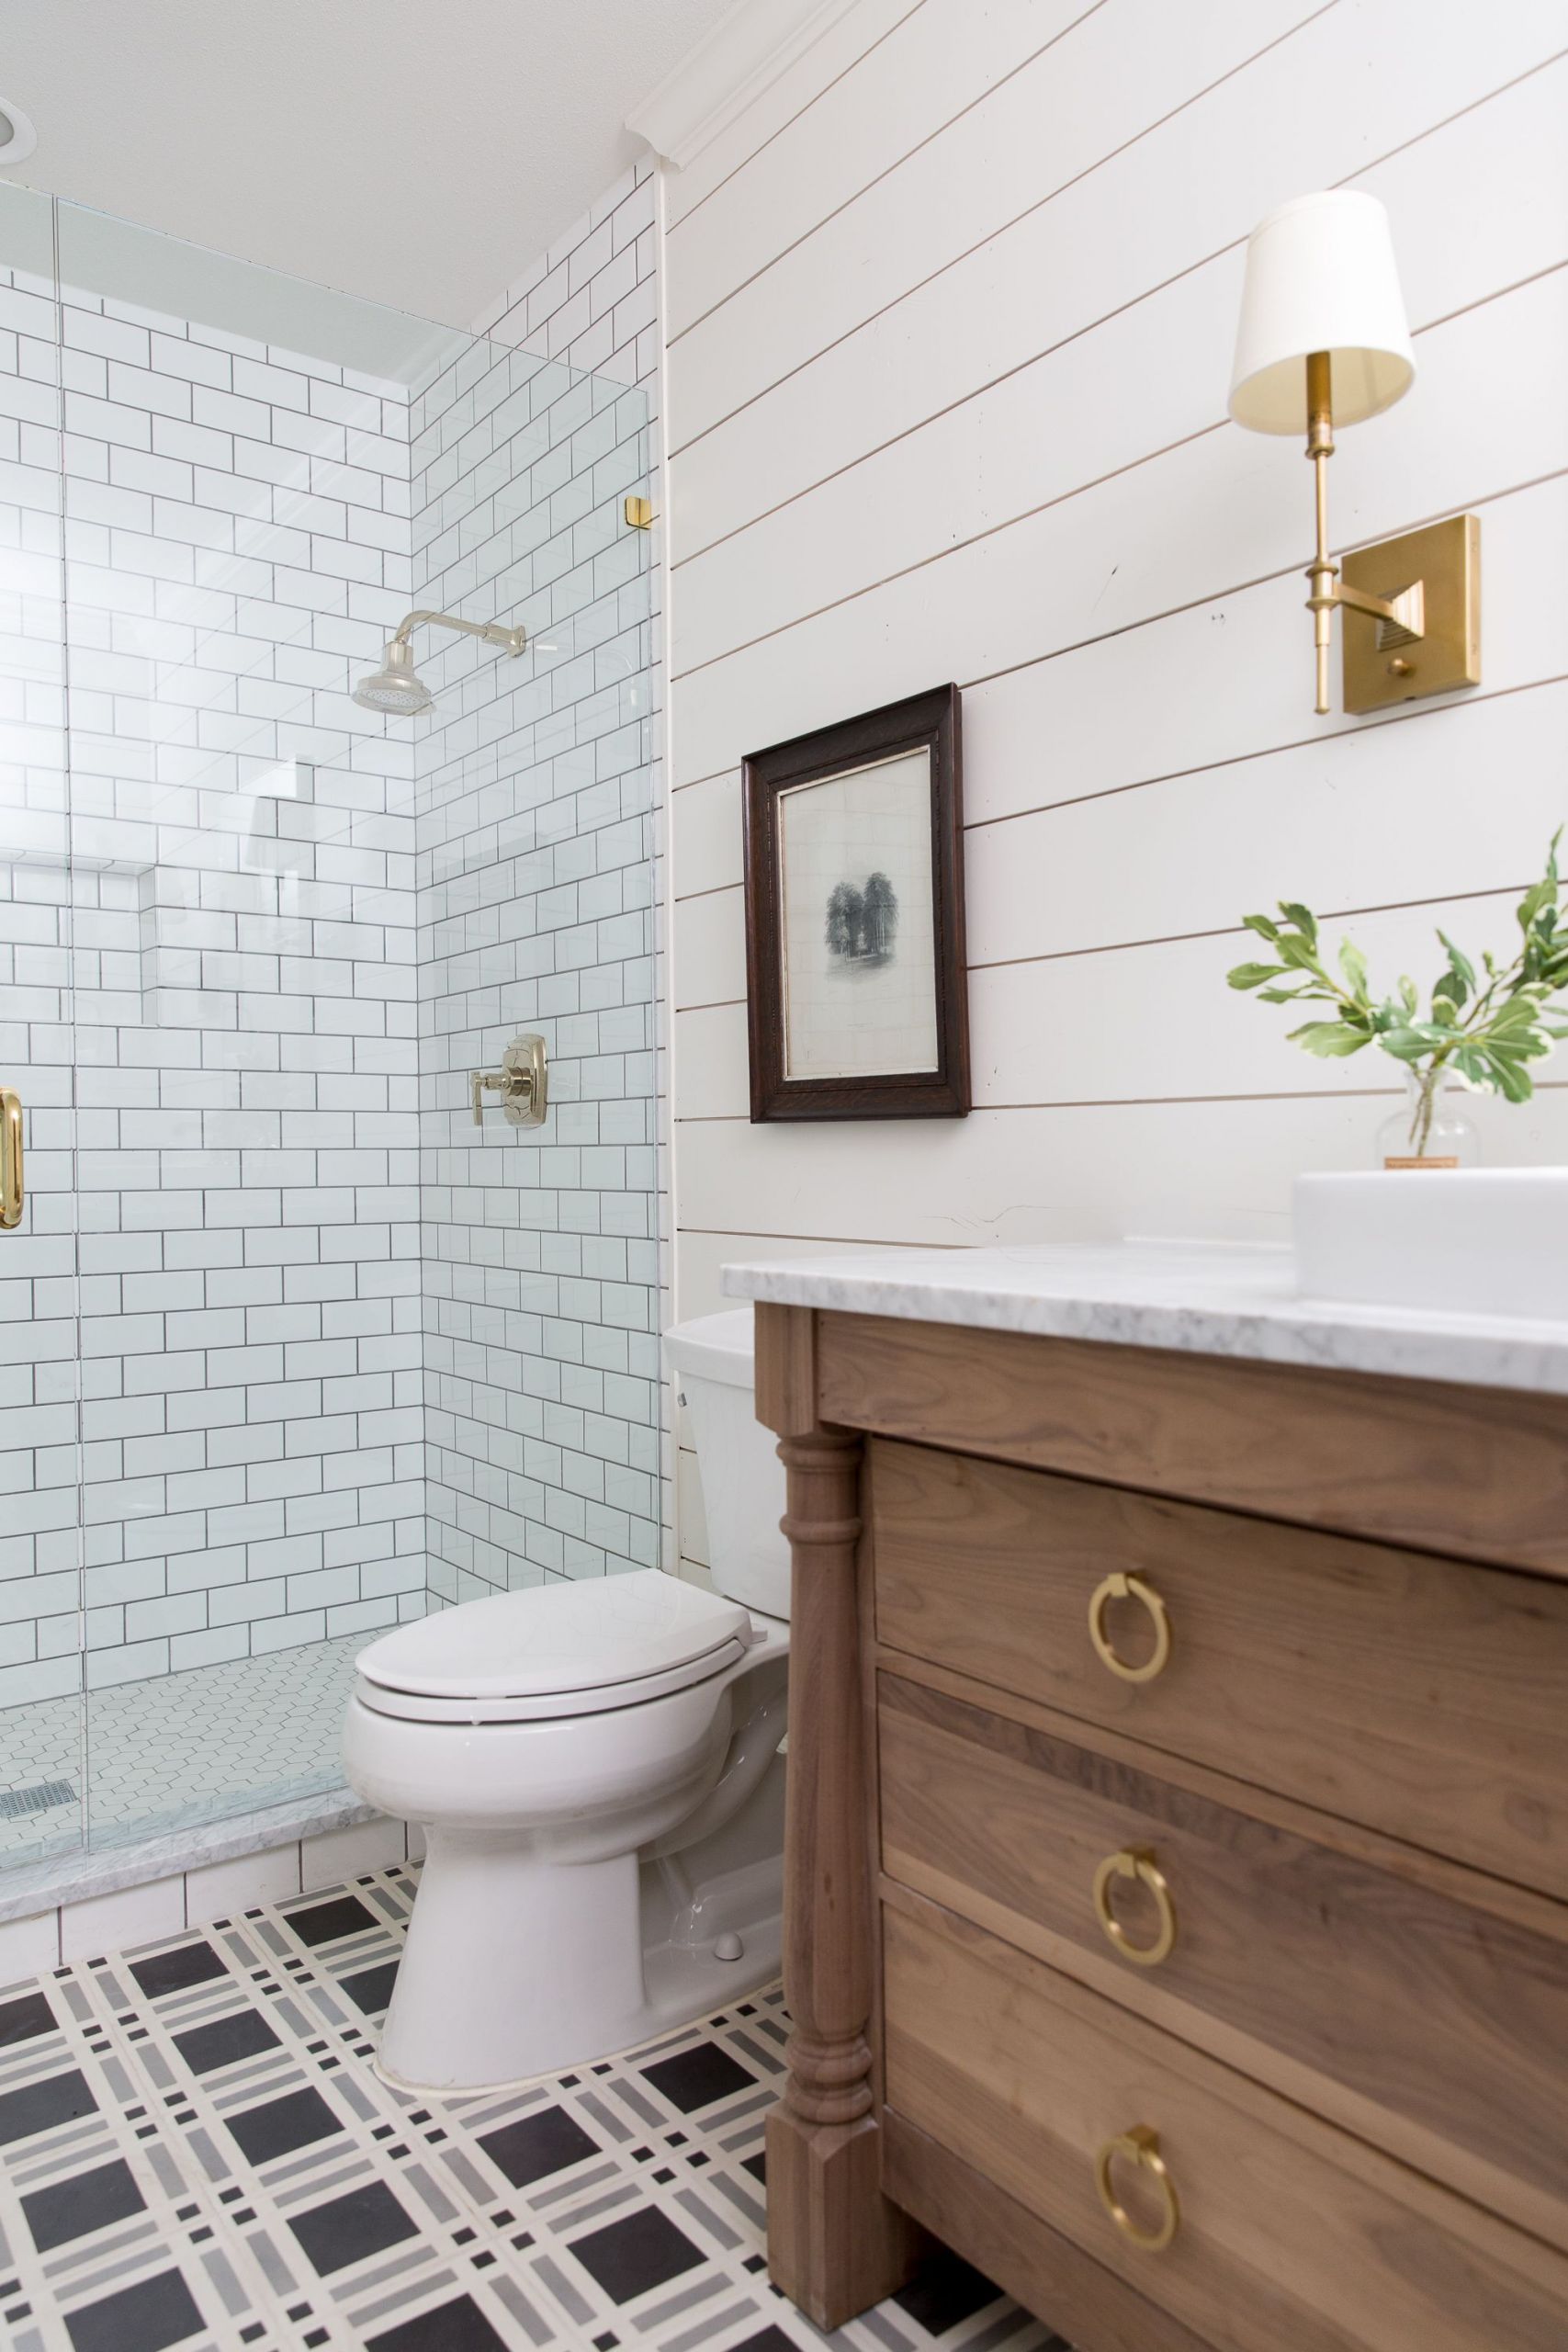 Joanna Gaines Bathroom Design
 Stay Vacation Rentals Designed by Joanna Gaines in 2019